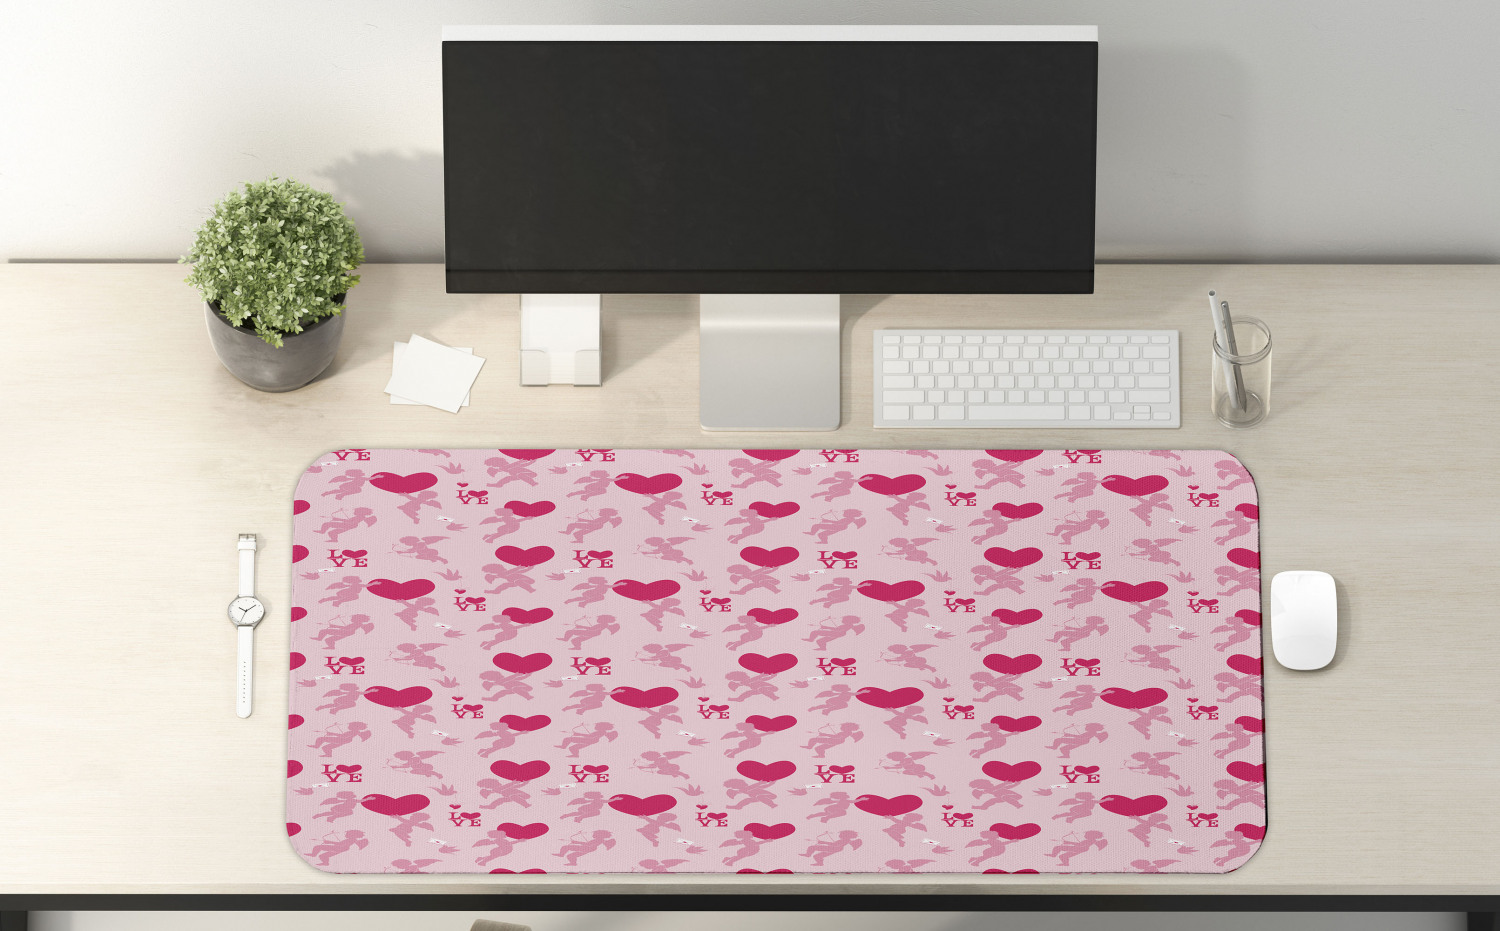 Love Computer Mouse Pad, Pattern with Silhouettes of Angel Heart Bird and Calligraphic Text Love Artwork Print, Rectangle Non-Slip Rubber Mousepad X-Large, 35" x 15", Rose Pink, by Ambesonne - image 2 of 2